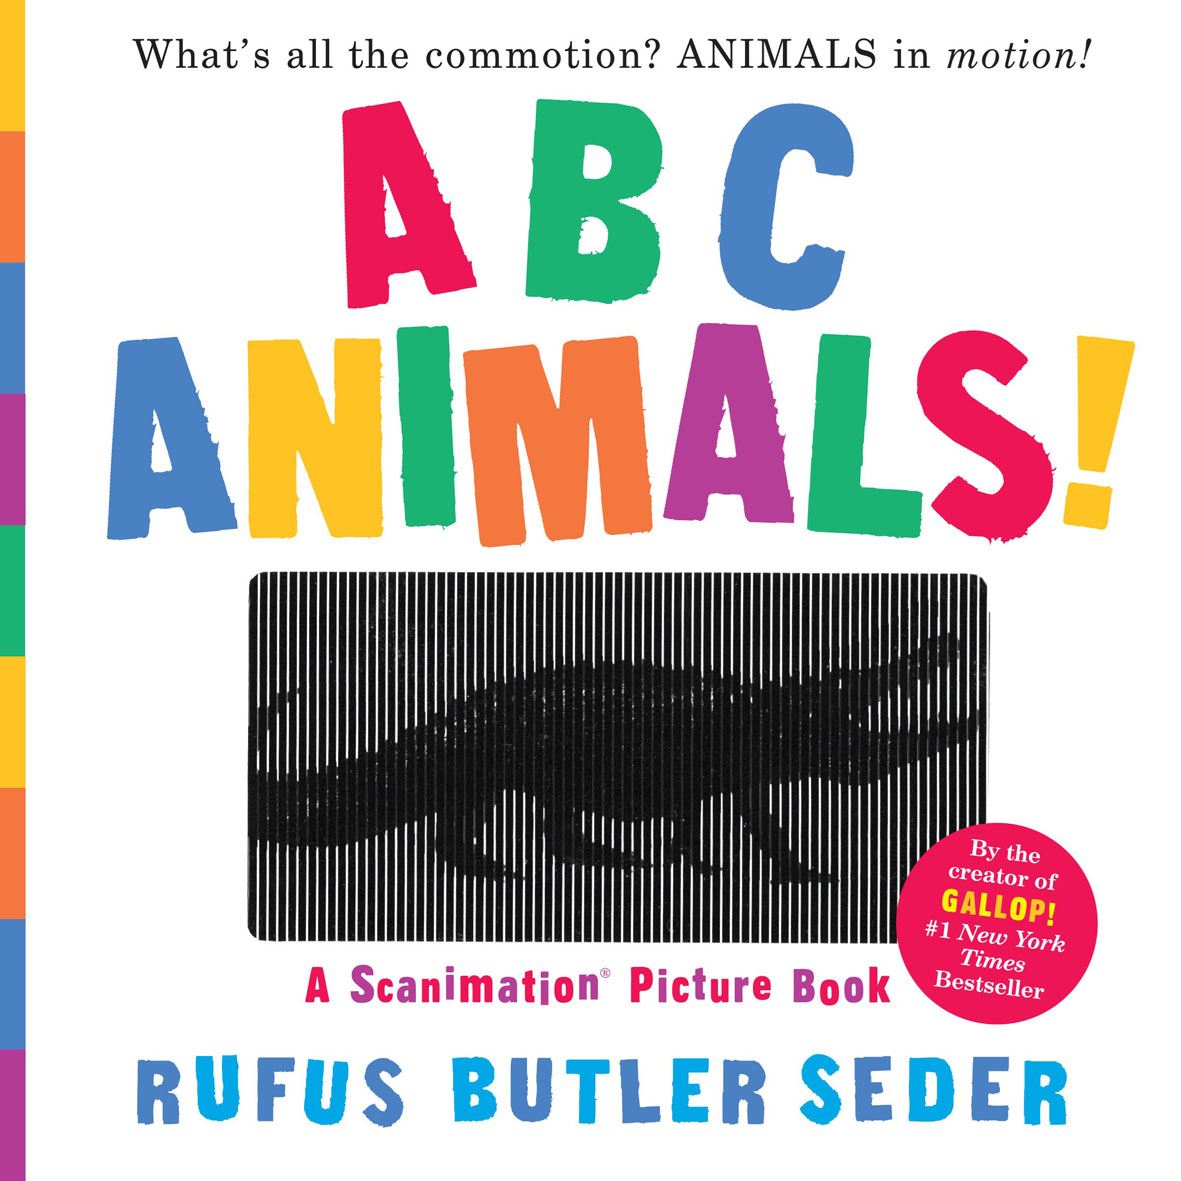 ABC Animals Book - Scanimation Picture Book